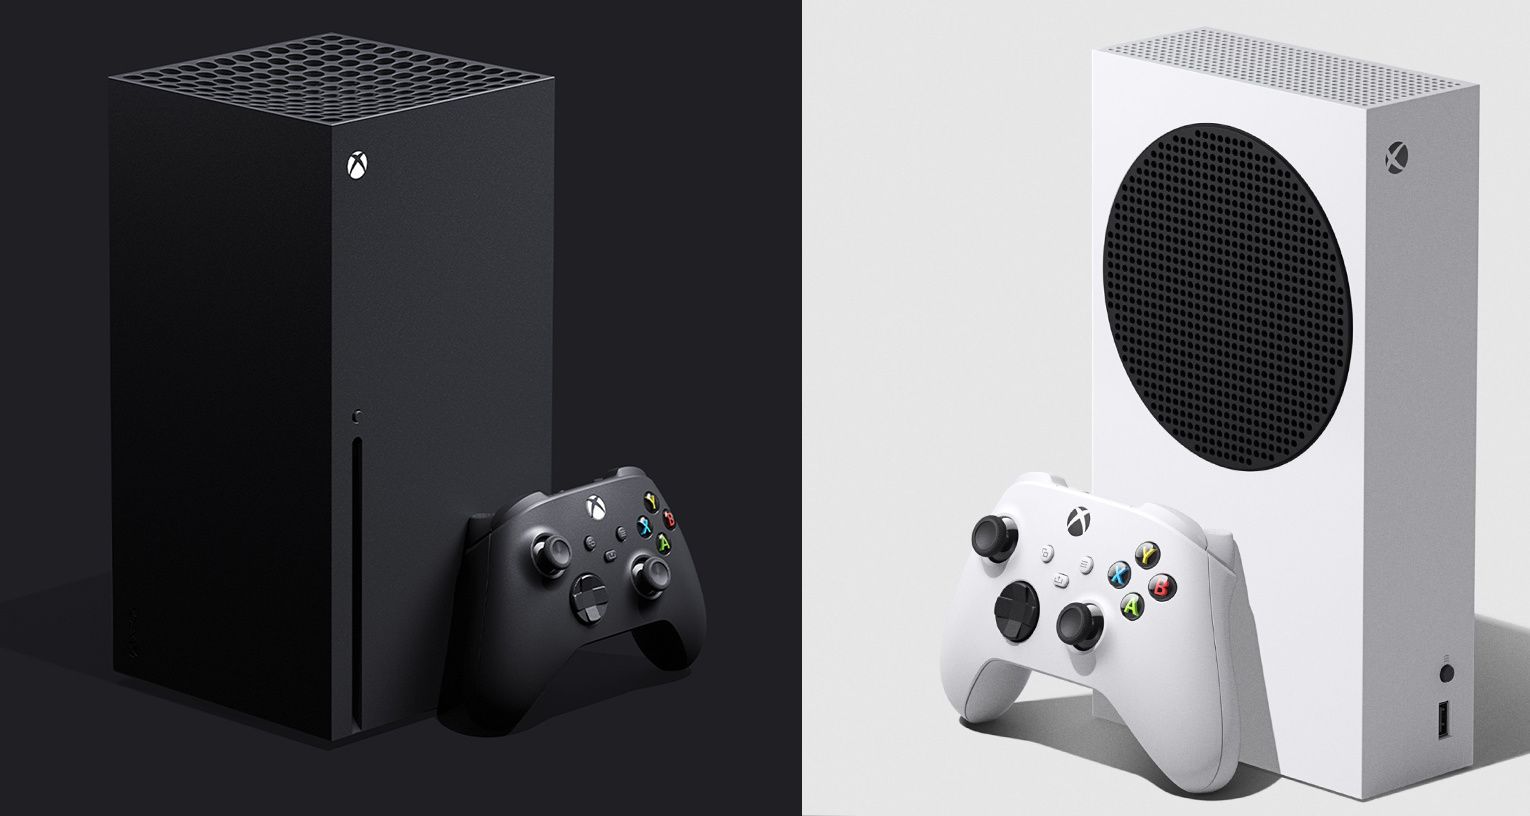 Xbox Series X (left) and the smaller Series S